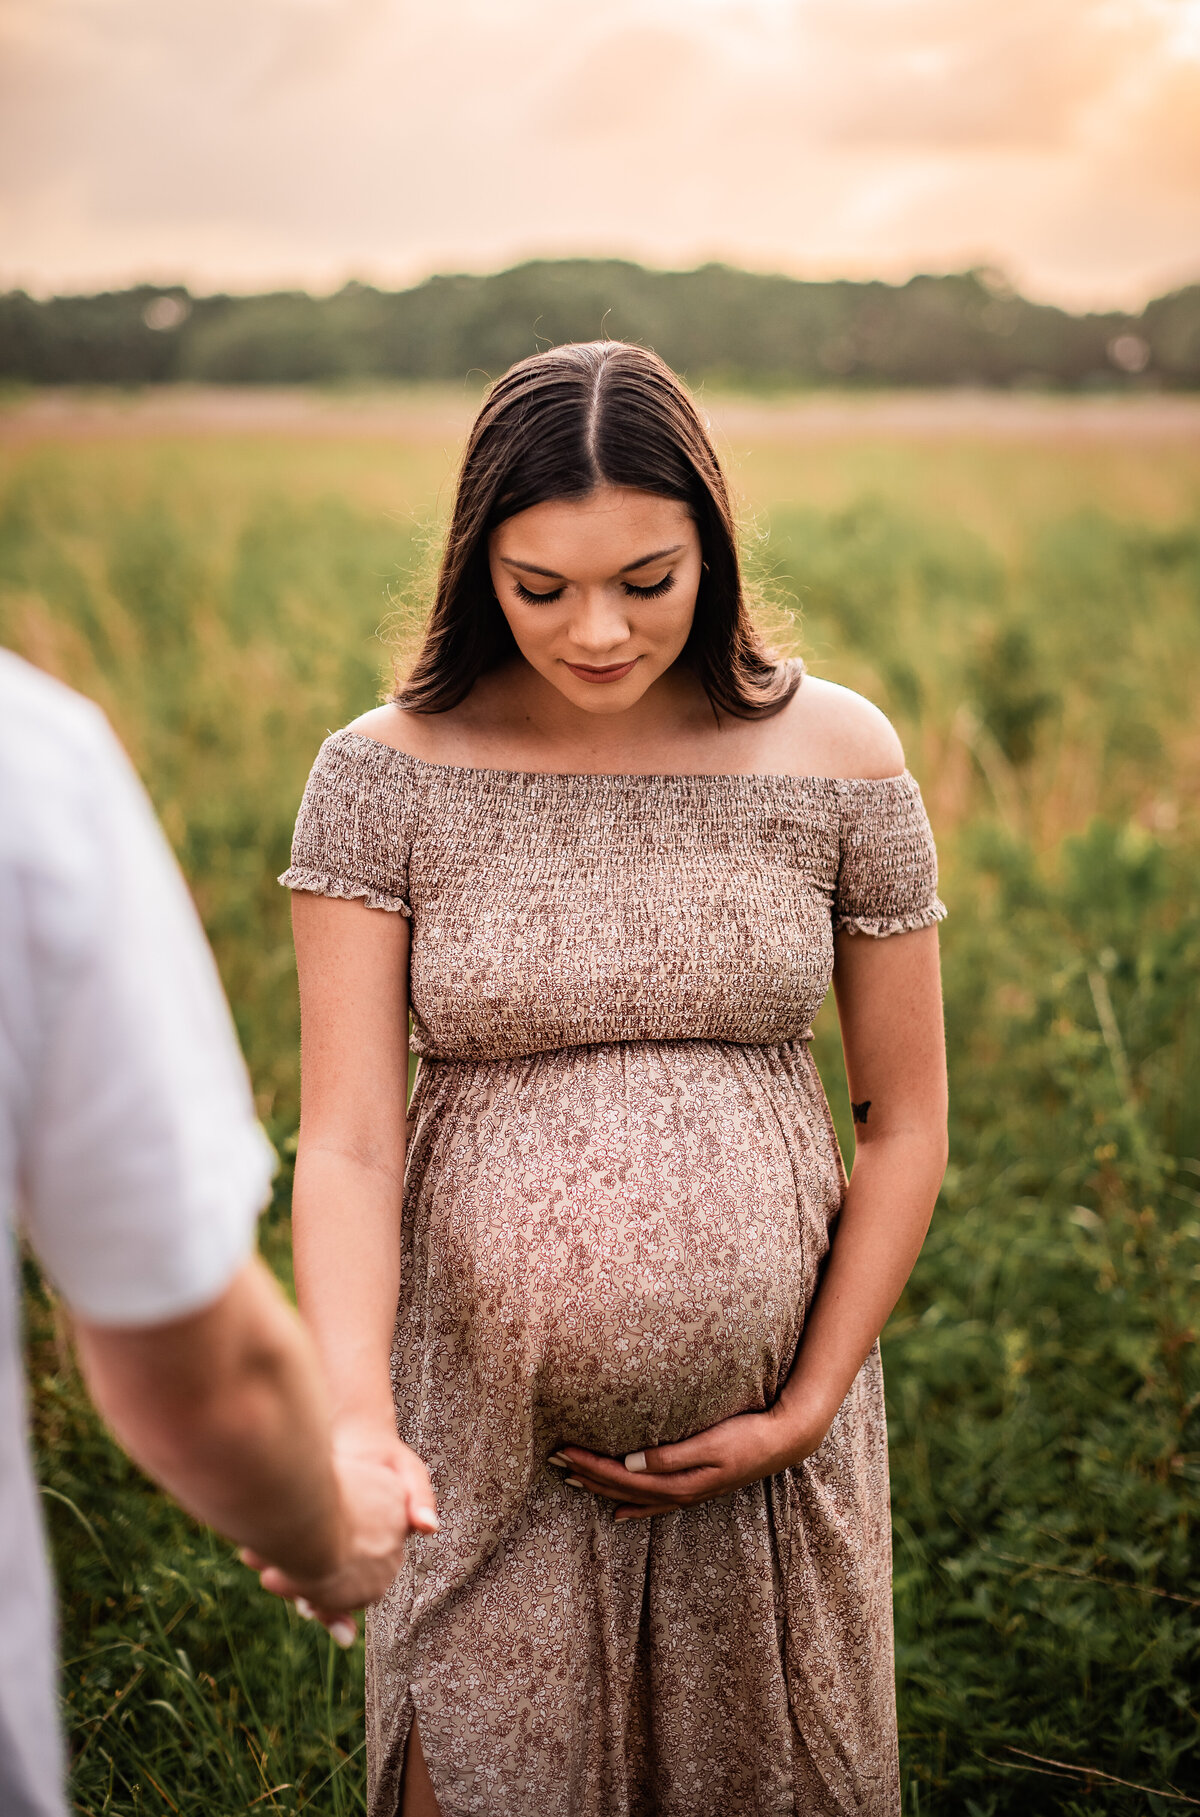 A woman holds her baby bump and looks down at er belly while her boyfriend holds her hand in the foreground.